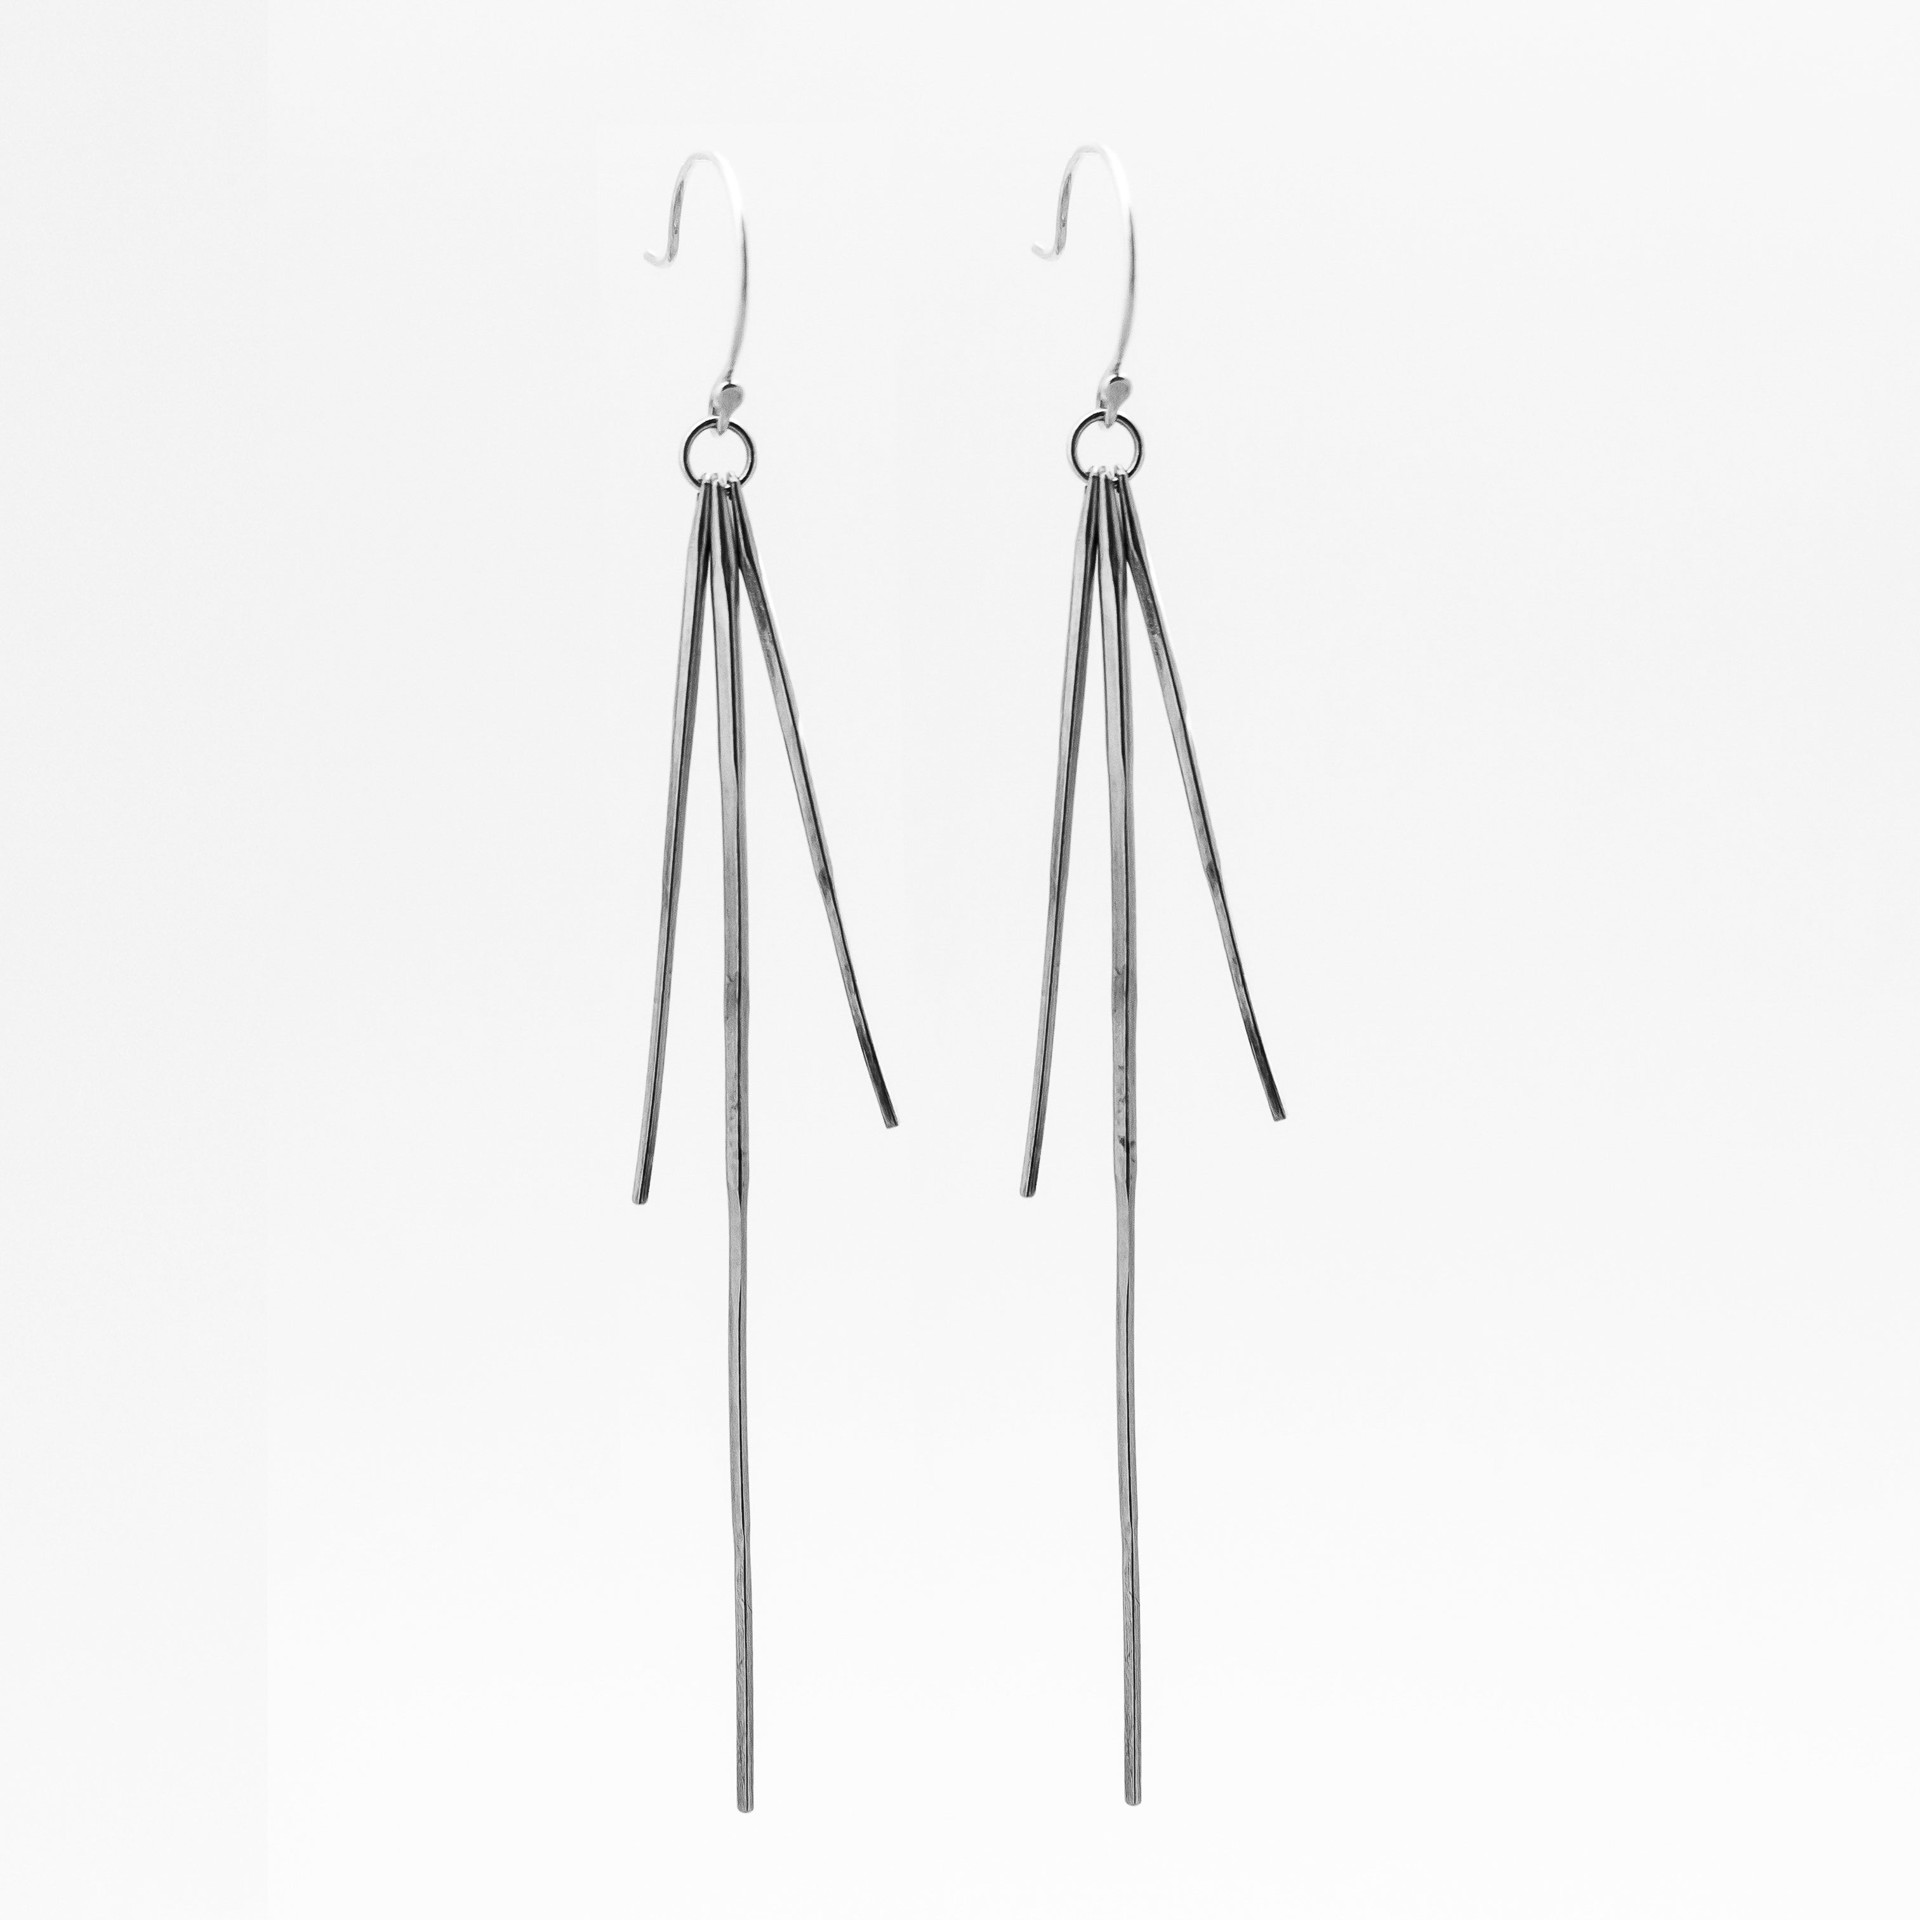 Cactus Spine Earrings - Brass by Clementine & Co. Jewelry